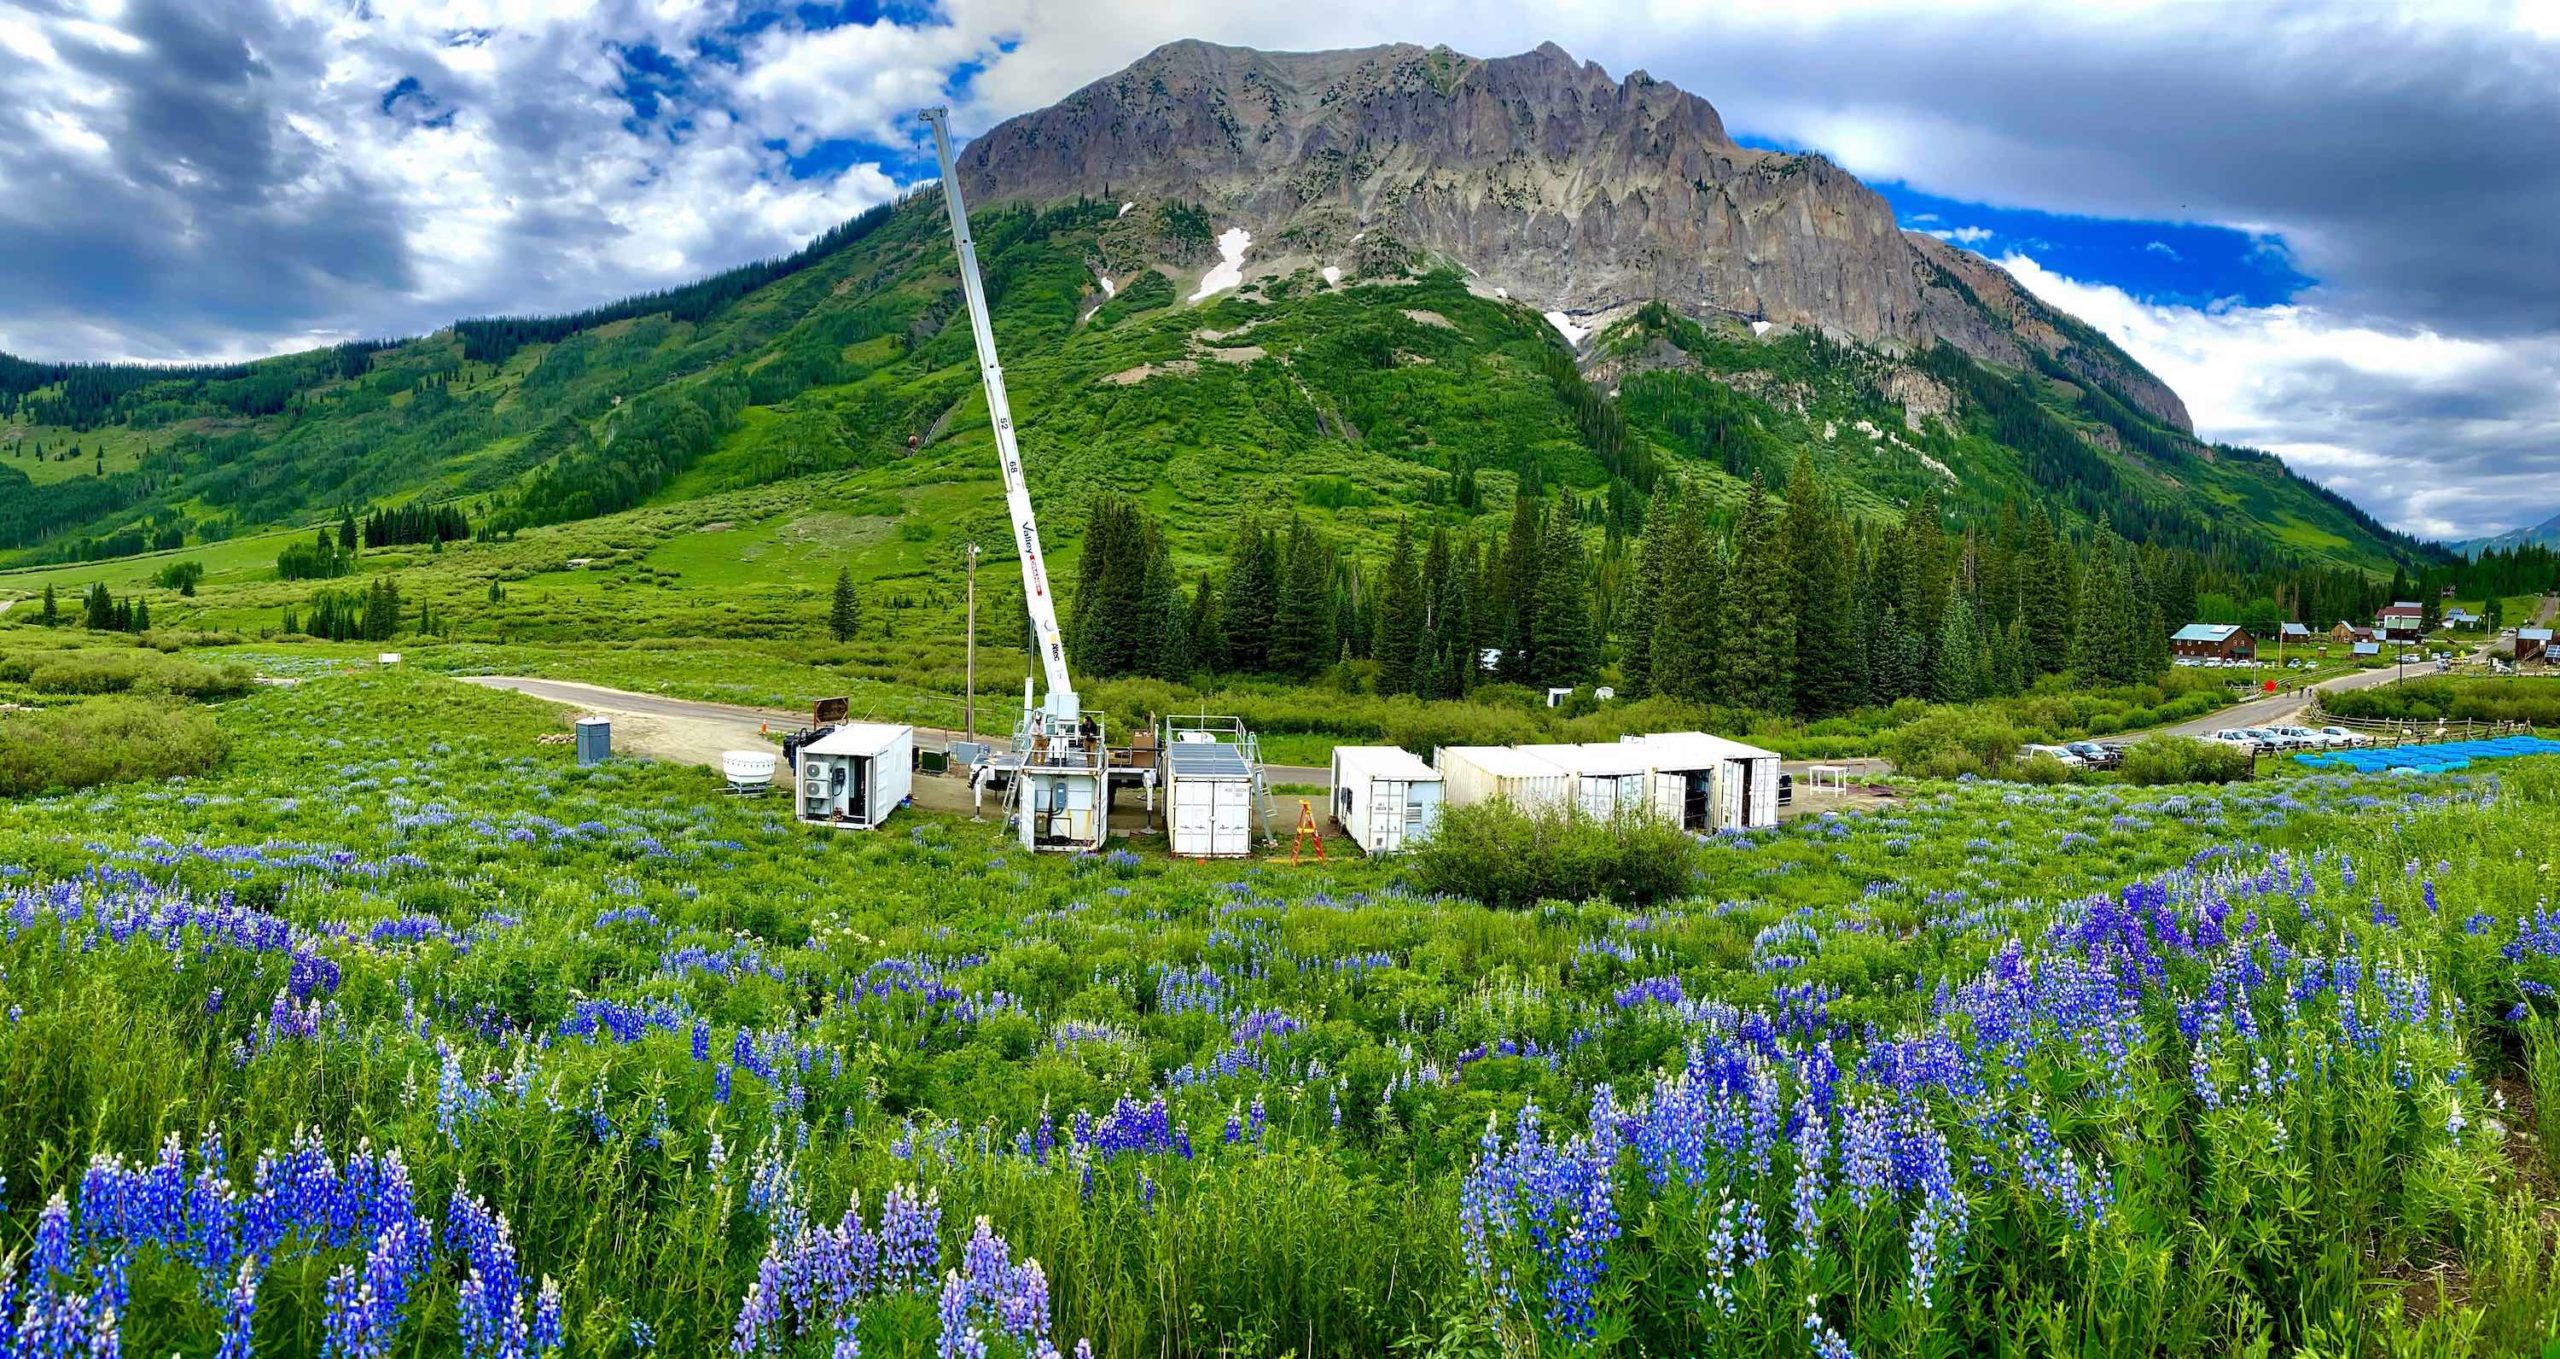 Shipping containers set in beautiful mountain landscape